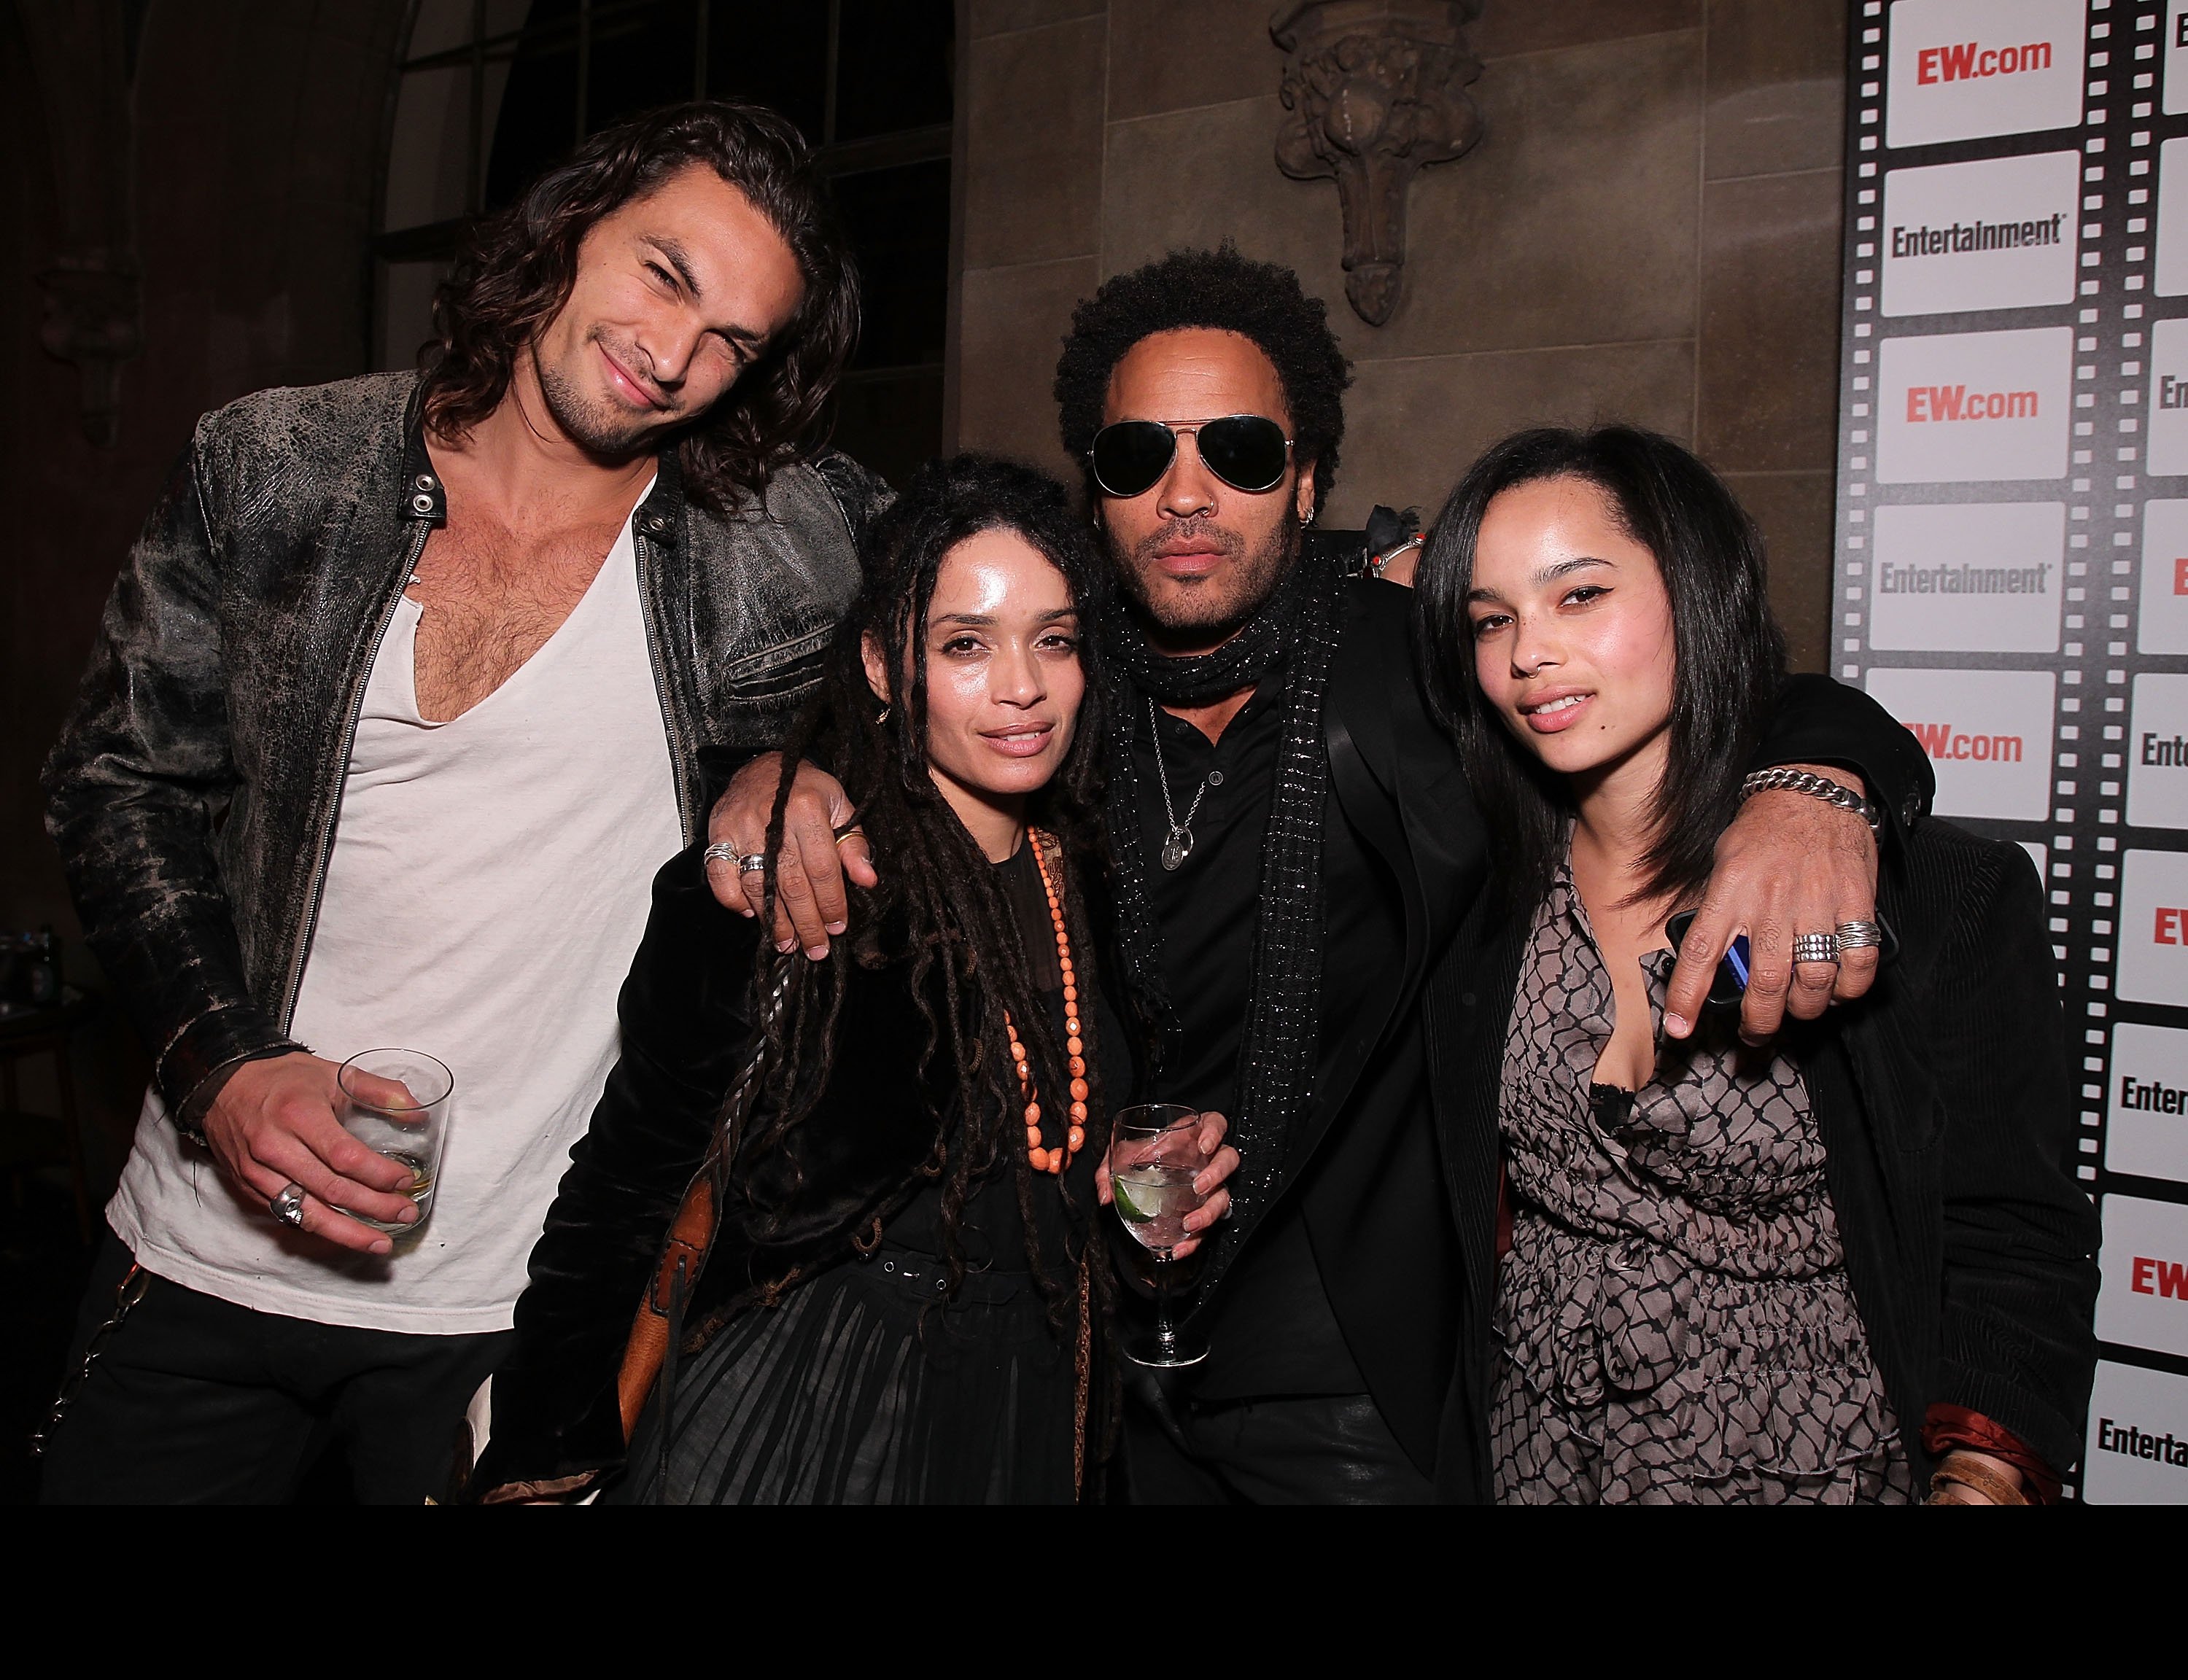 Jason Momoa, Lisa Bonet, Lenny Kravitz and Zoe Kravitz at Entertainment Weekly's Party to Celebrate the Best Director Oscar Nominees held at Chateau Marmont on February 25, 2010 in Los Angeles, California | Source: Getty Images